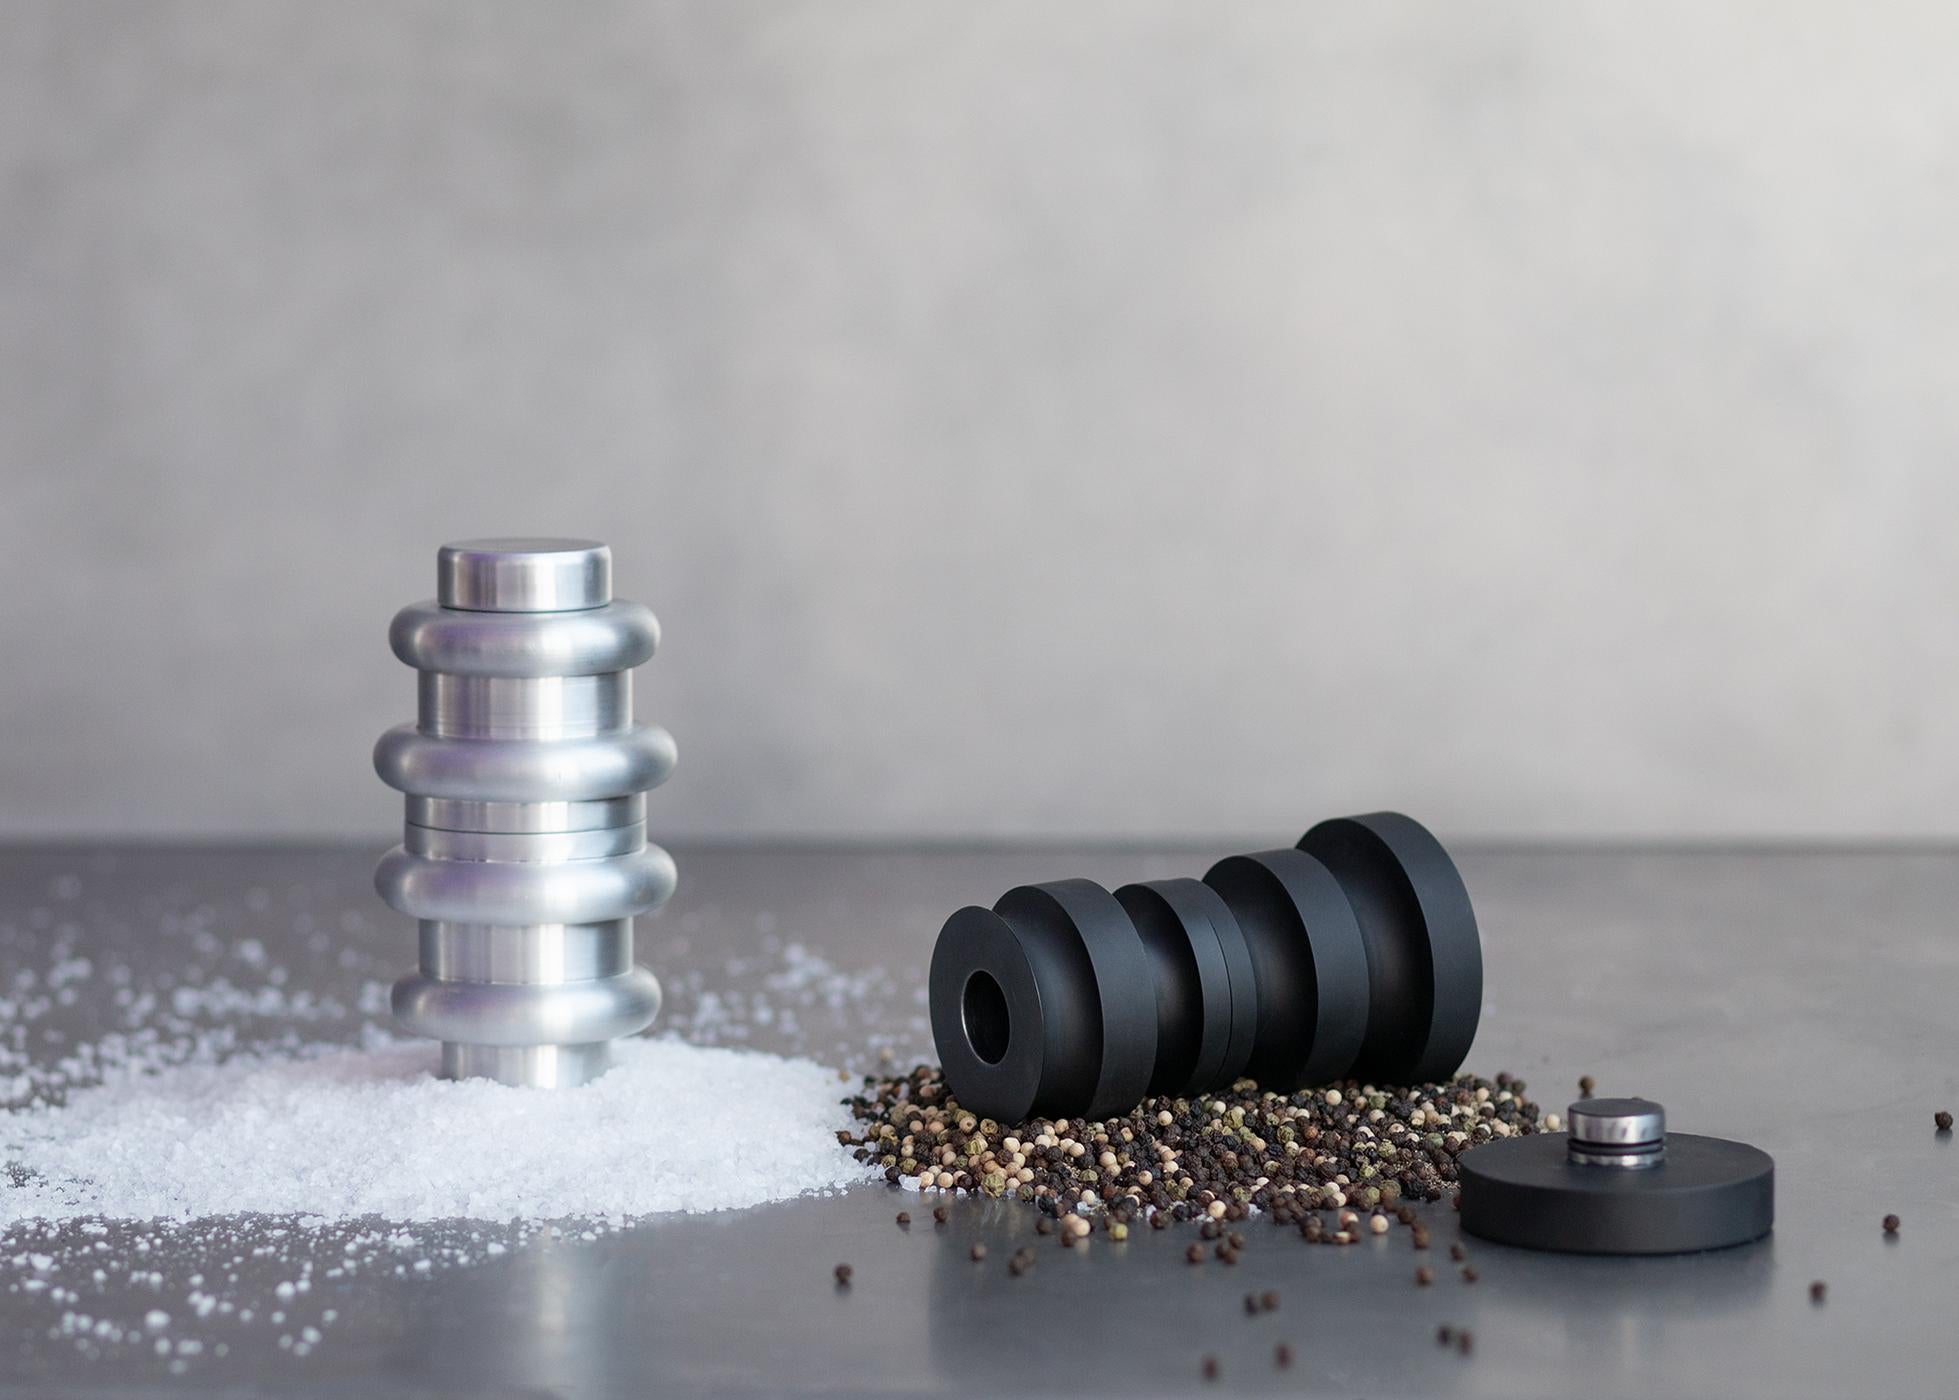 Inspired by mid-century Danish design, the Coupled Salt and Pepper Mills resemble wood turned objects and reimagine them in new and classic materials. Since salt and pepper go hand in hand, the forms nest into one another, echoing their function.